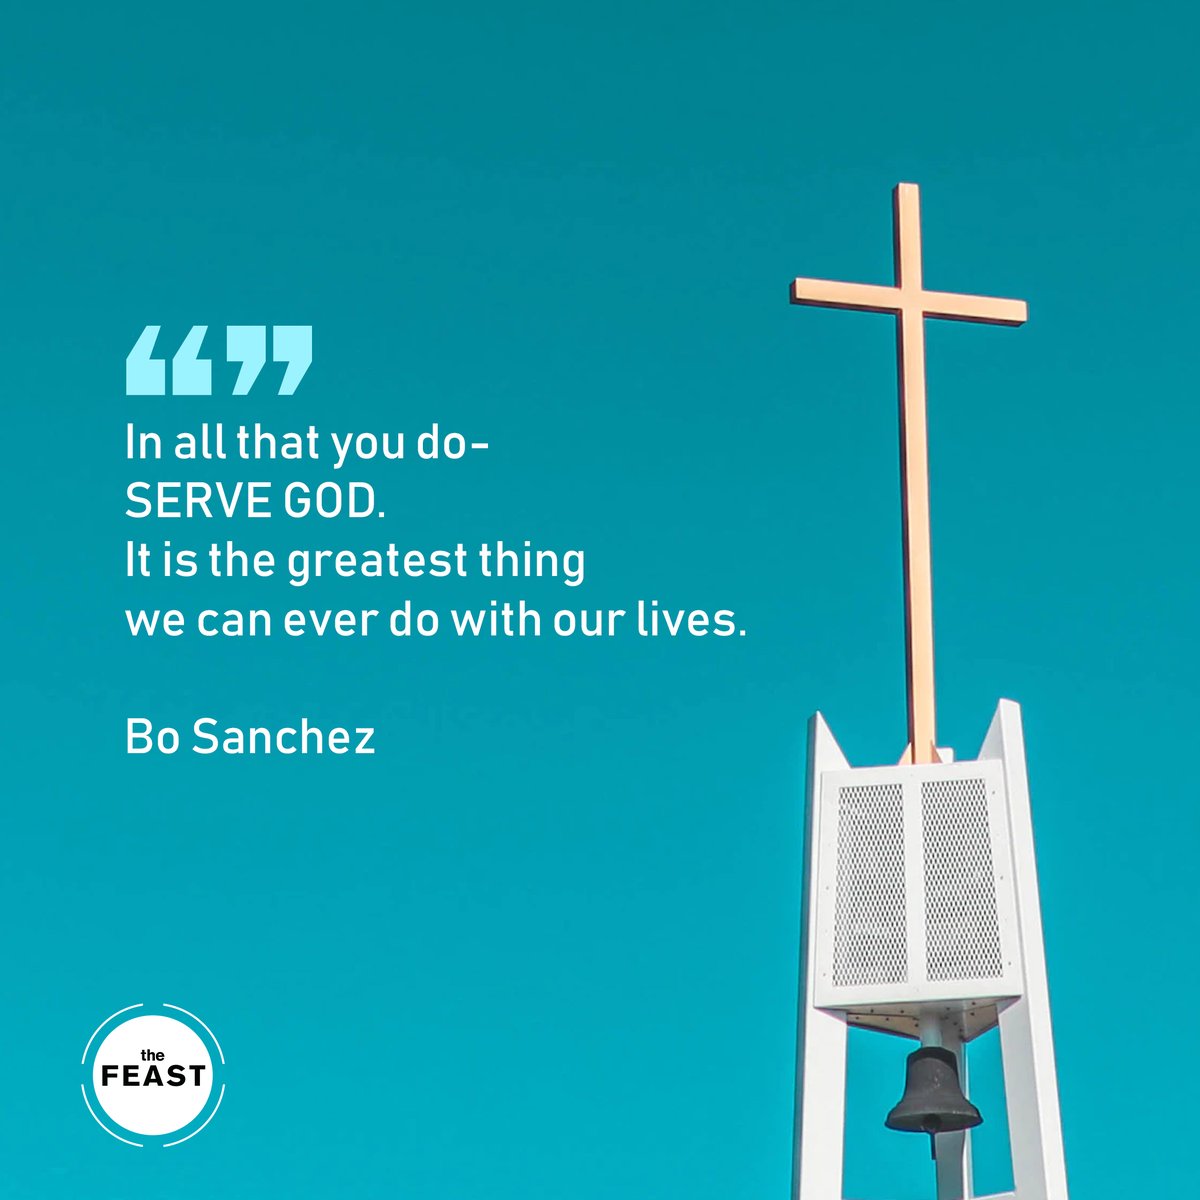 'In all that you do-SERVE GOD. It is the greatest thing we can ever do with our lives.' (Bo Sanchez)

#TheFeast #Youareloved